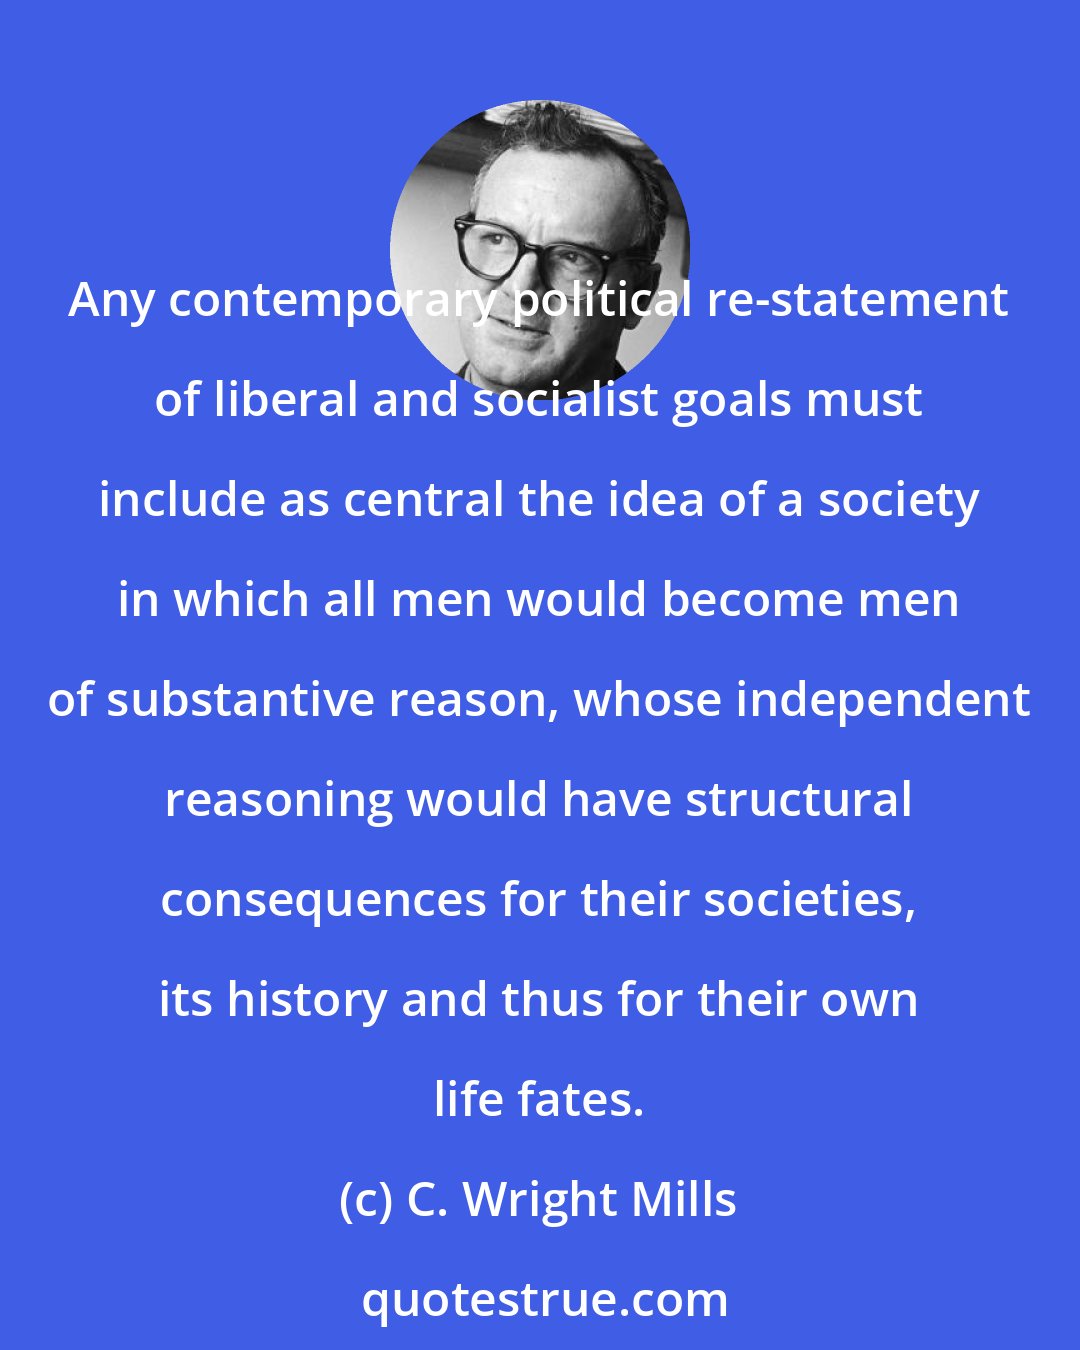 C. Wright Mills: Any contemporary political re-statement of liberal and socialist goals must include as central the idea of a society in which all men would become men of substantive reason, whose independent reasoning would have structural consequences for their societies, its history and thus for their own life fates.